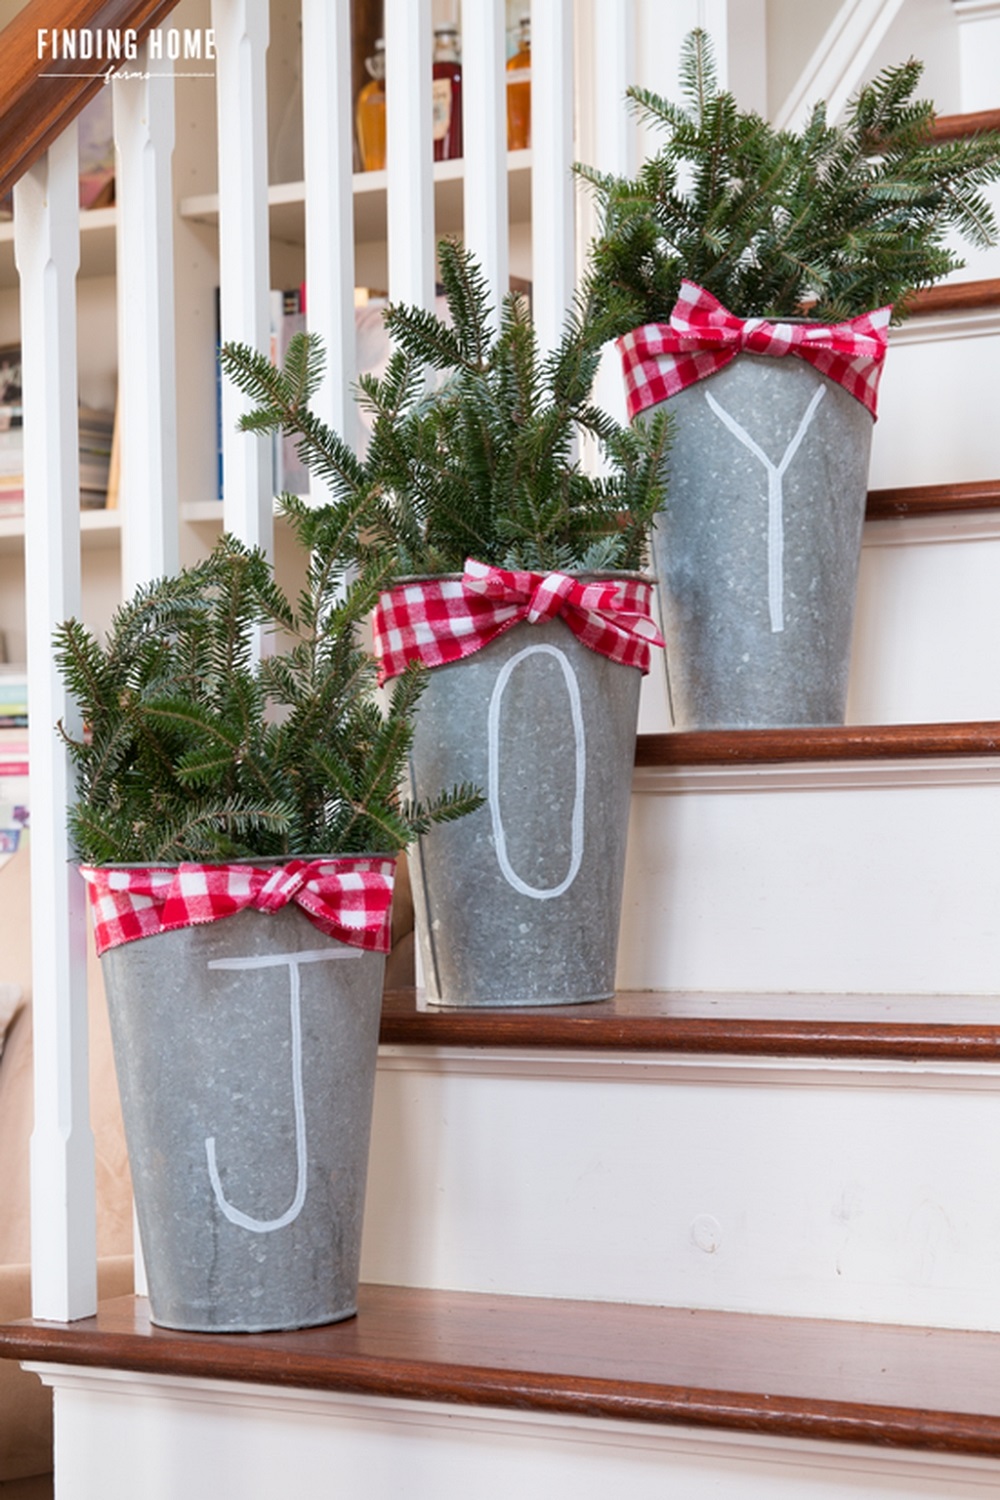 t3-3 Great ideas for decorating Christmas stairs that you should definitely try